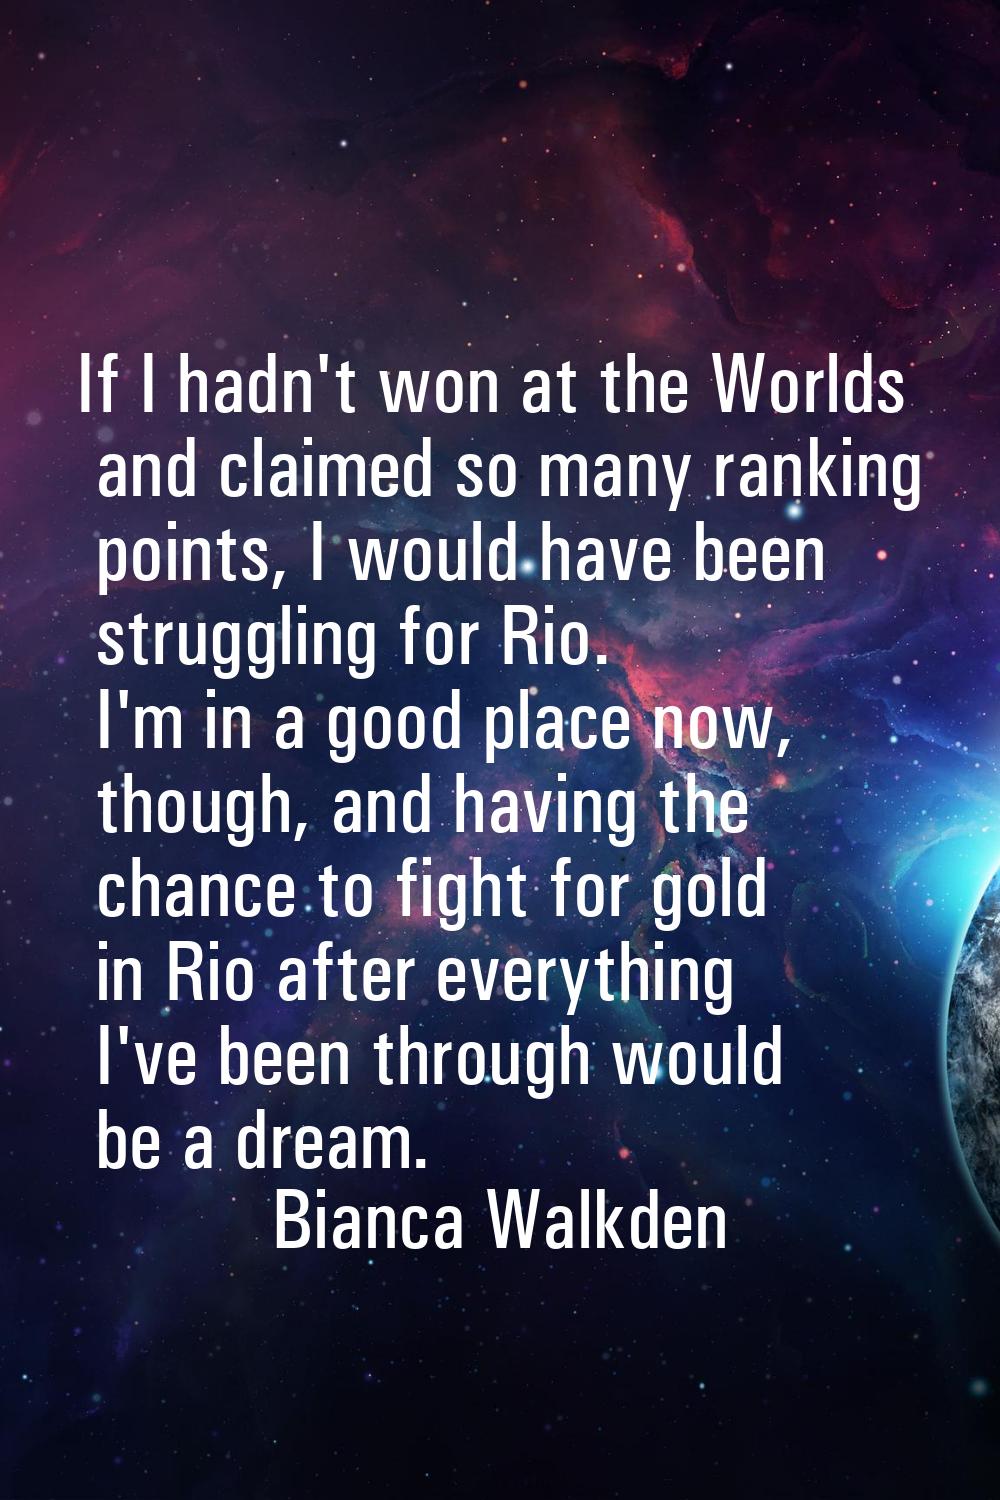 If I hadn't won at the Worlds and claimed so many ranking points, I would have been struggling for 